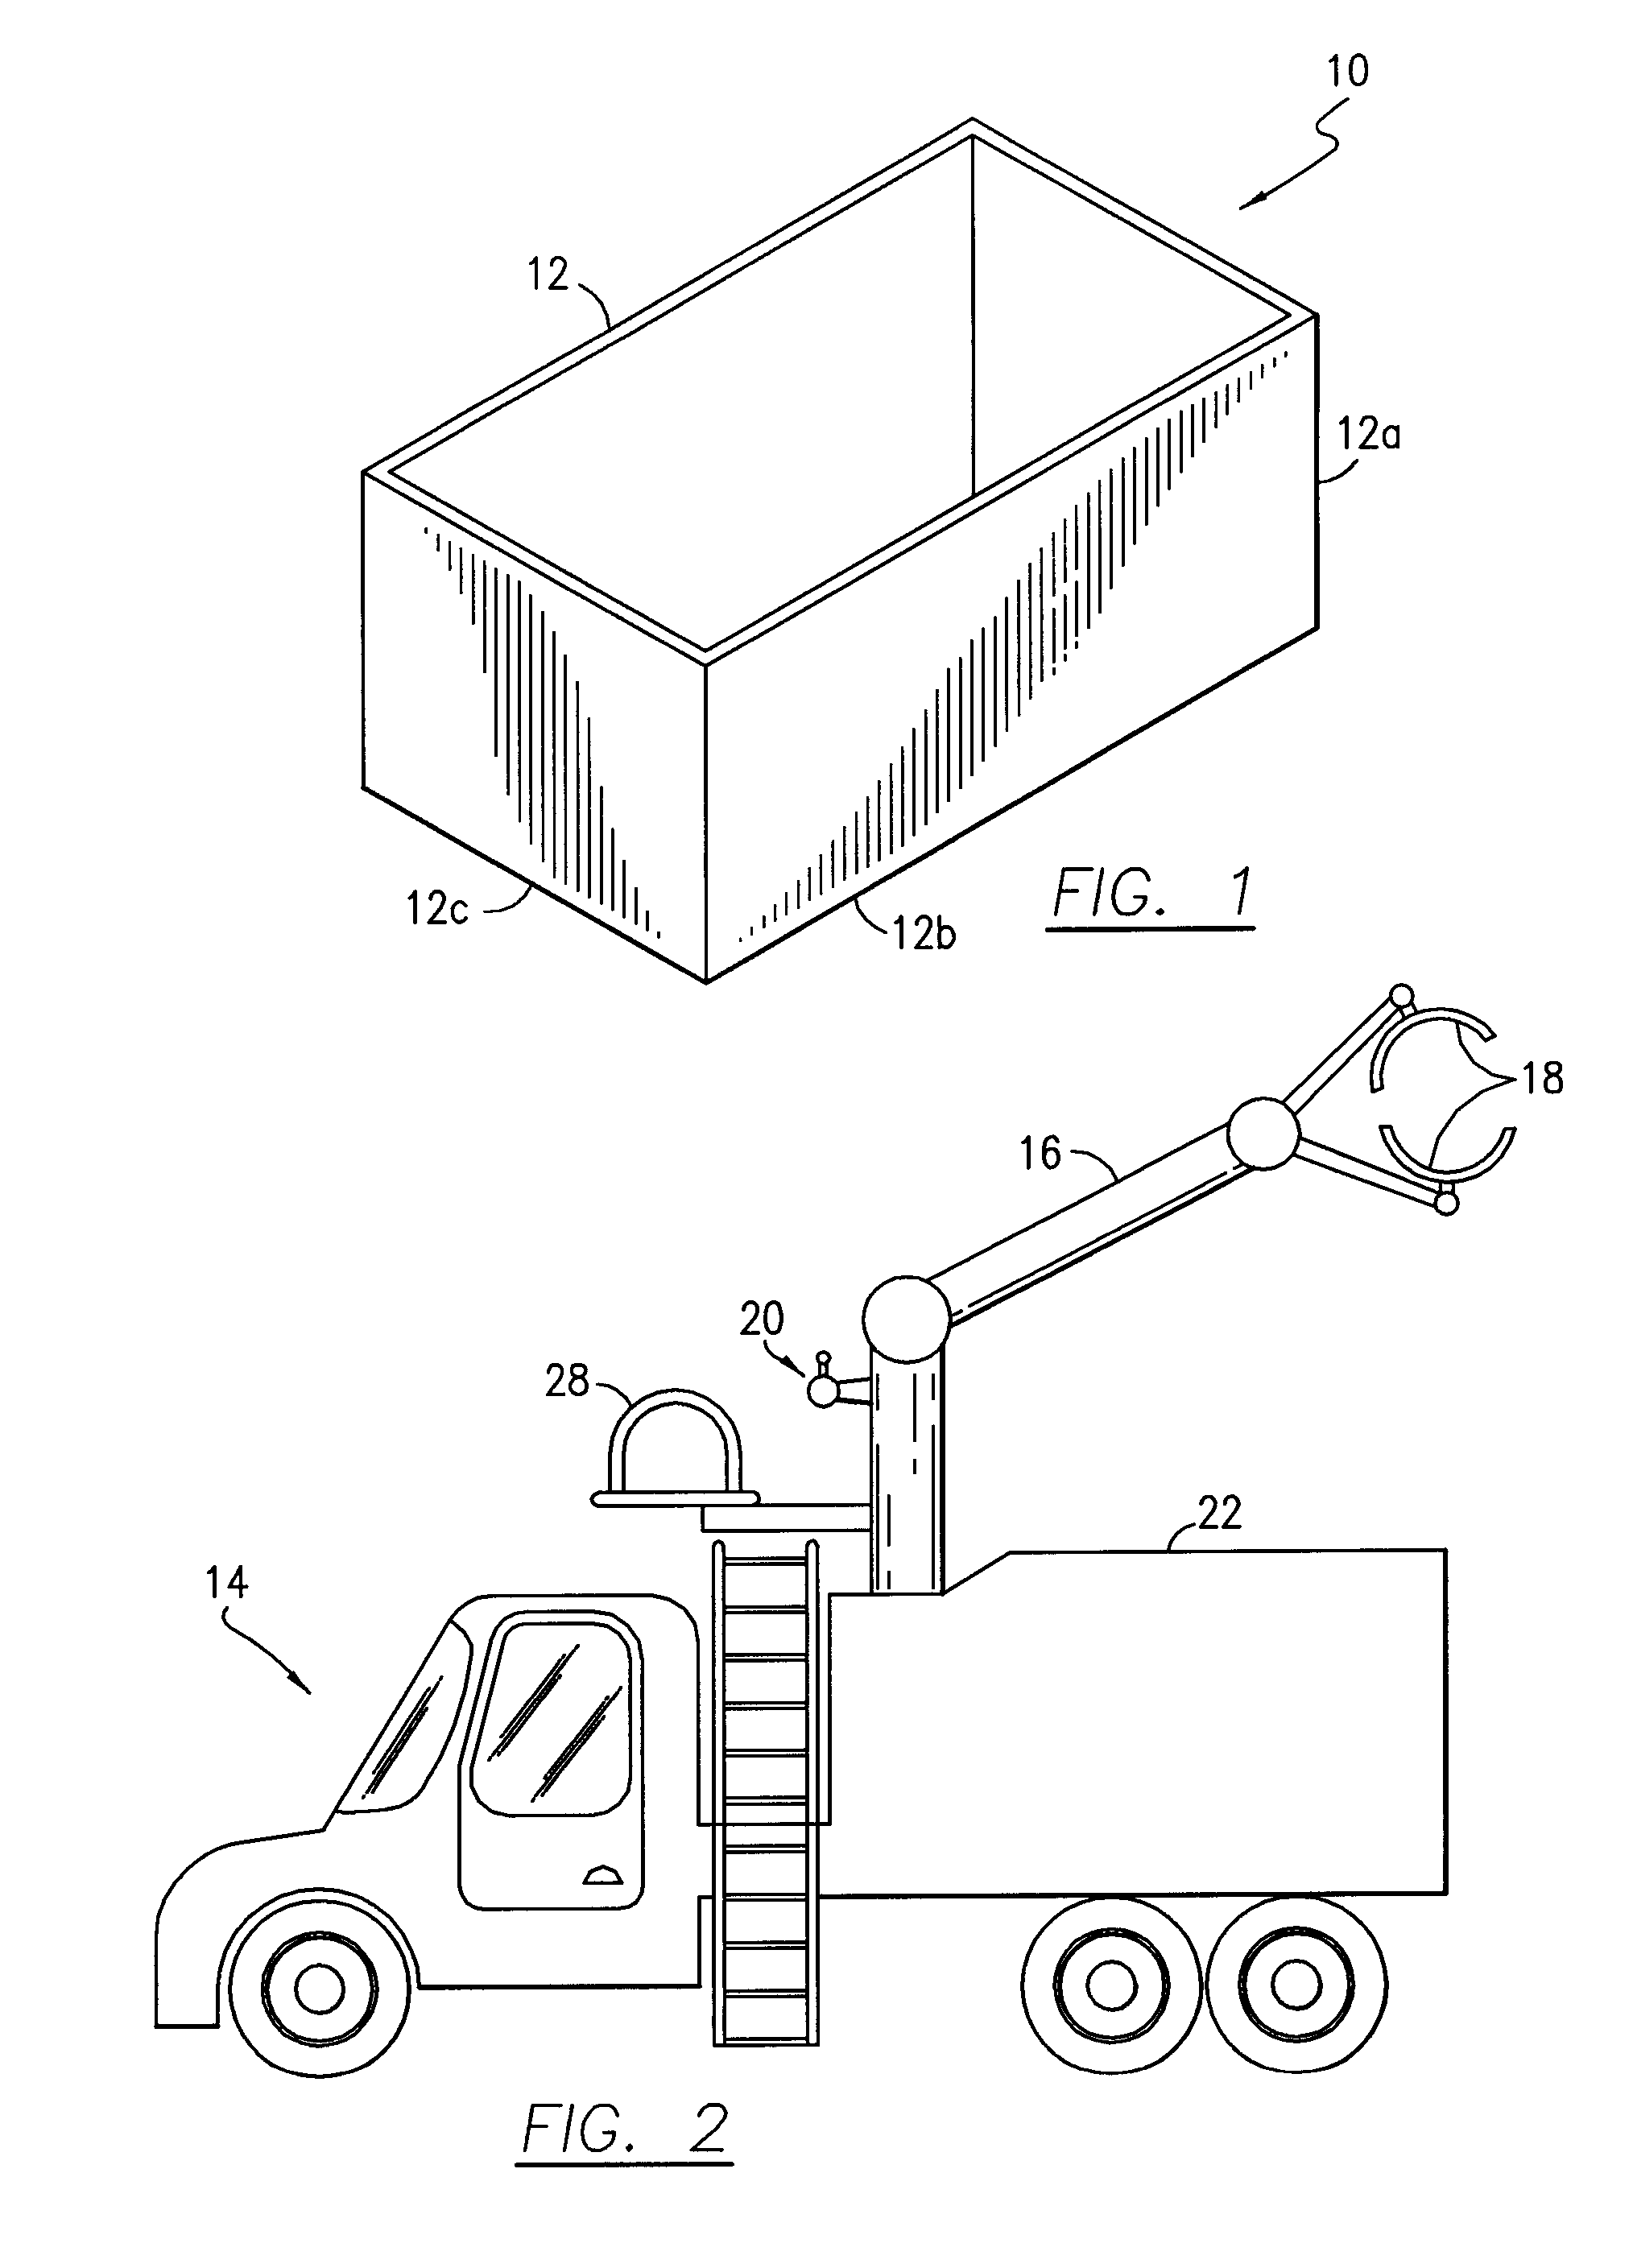 Method and system for construction debris removal from a construction site